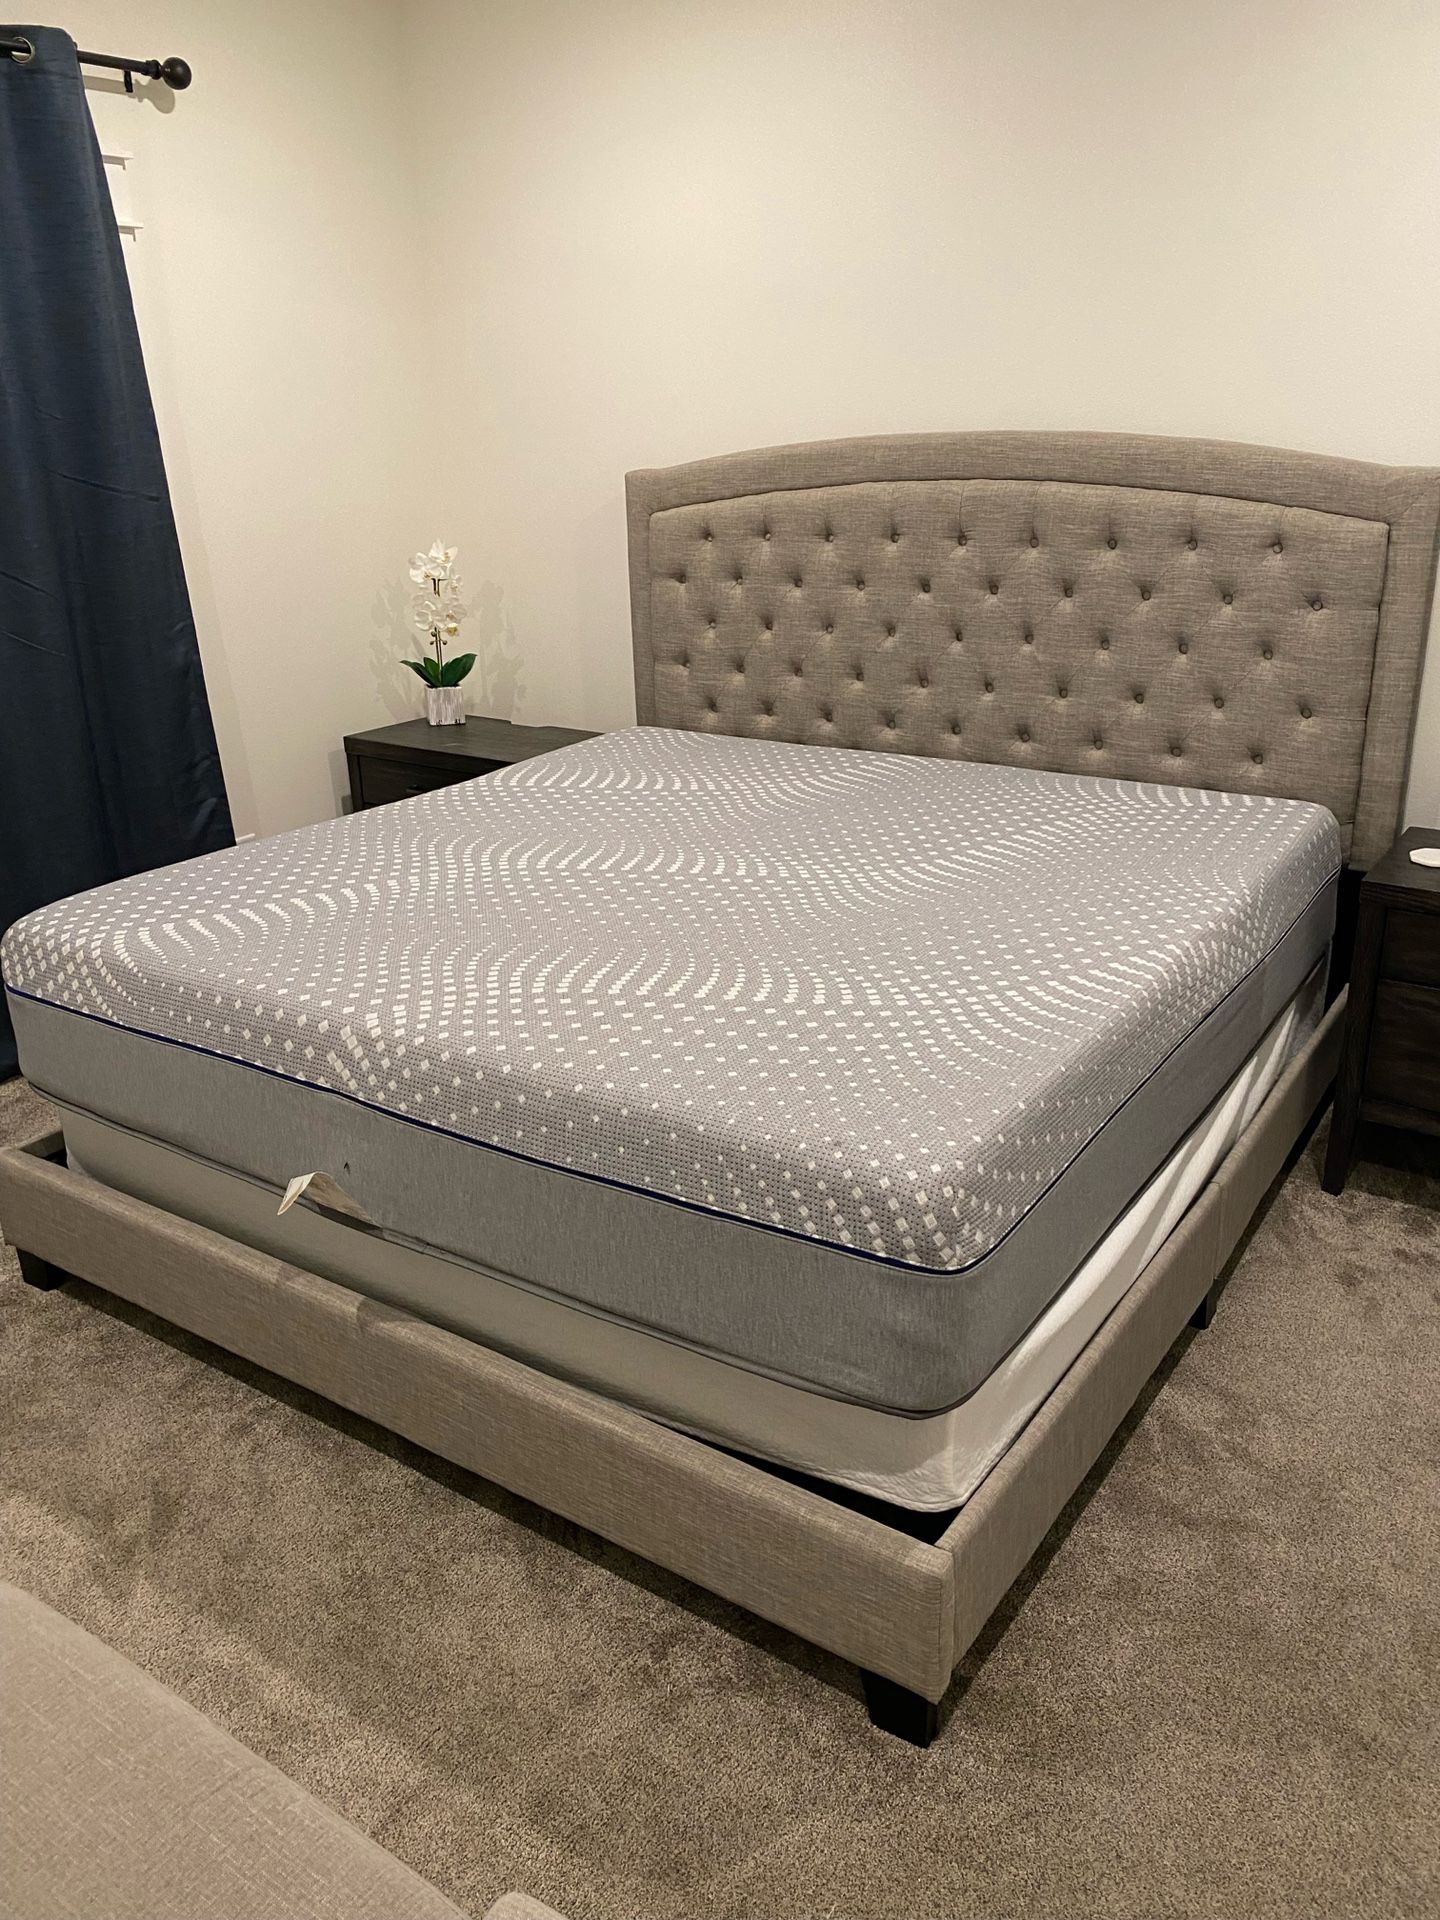 King Upholstered Bed Frame And Box Spring (no Mattress)